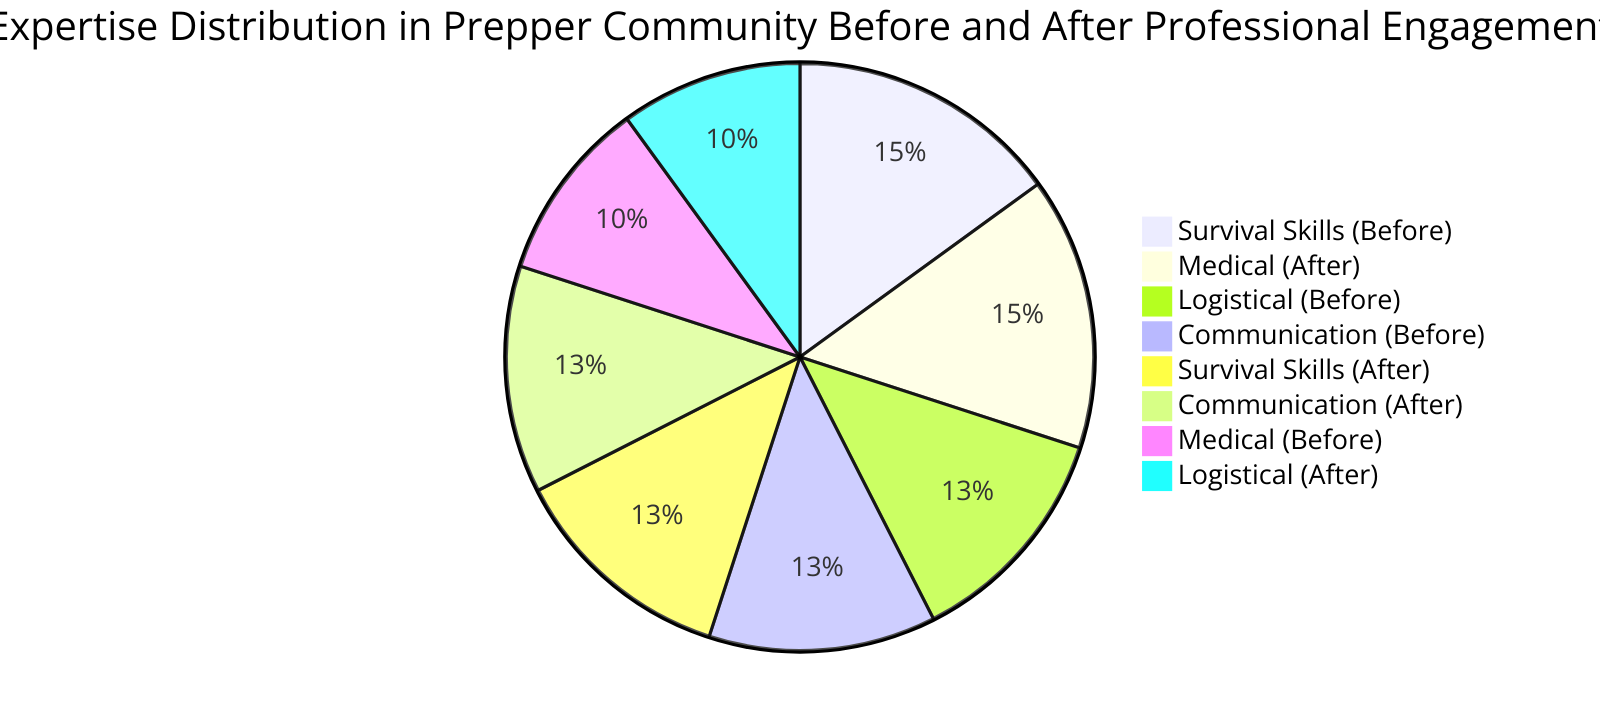 pie-chart diagram illustrating the distribution of expertise areas within a prepper community before and after engaging with professional emergency services